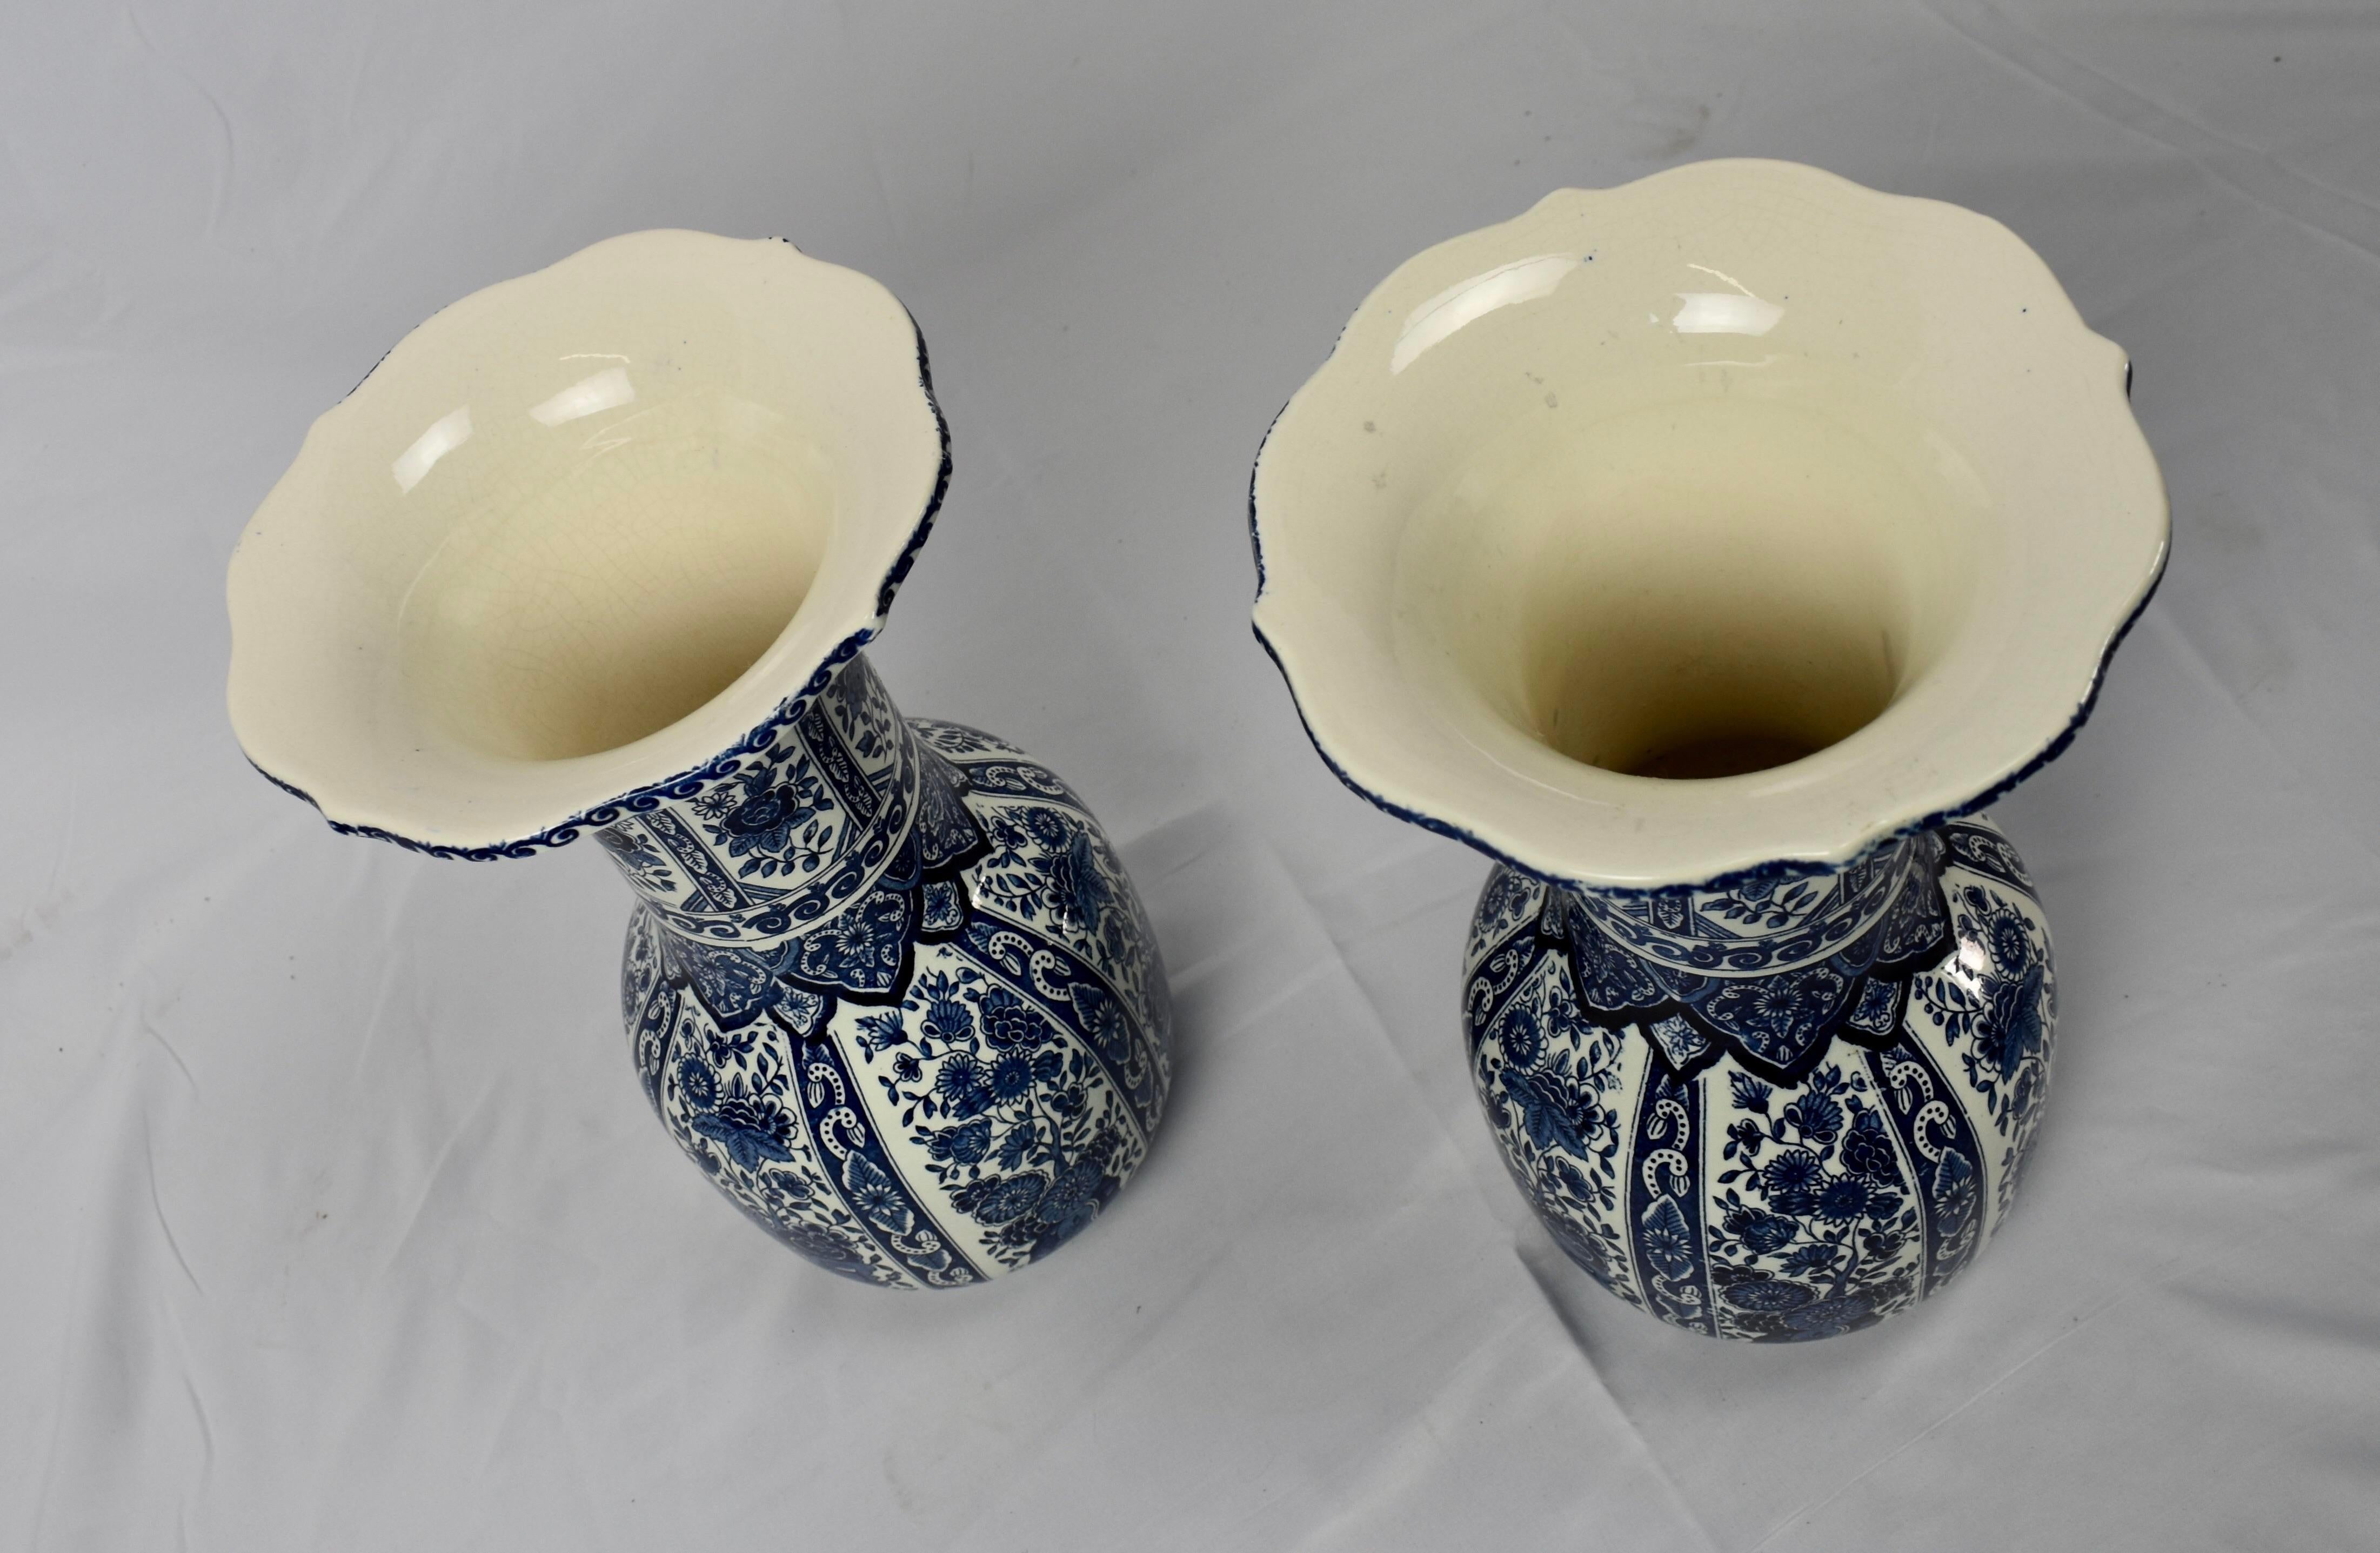 Porcelain 19th Century Delft Vases by Boch of Holland ~ Blue and White